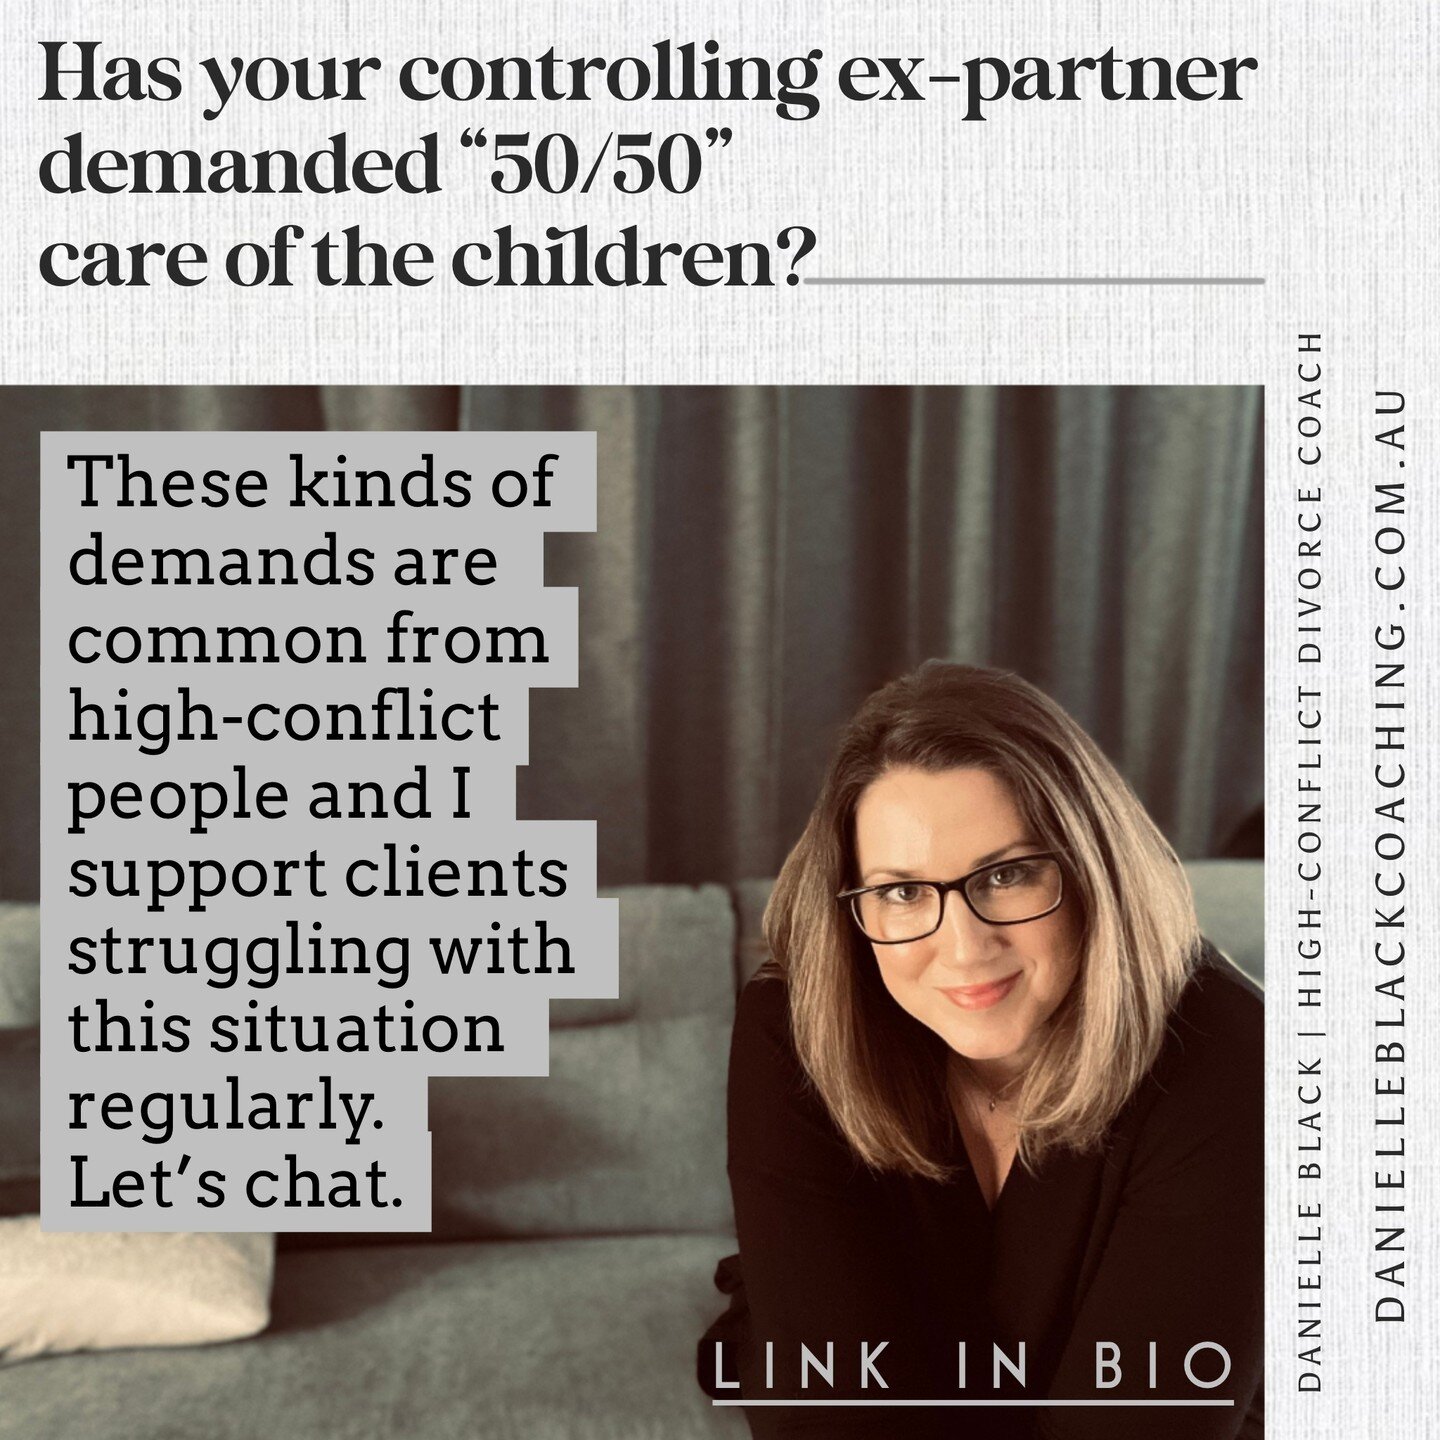 Equal shared care is something that is often demanded by high-conflict ex-partners, regardless of how interested or capable they are of caring for children for this timeframe.

When we view things through a child-focused lens, it is clear that BOTH p